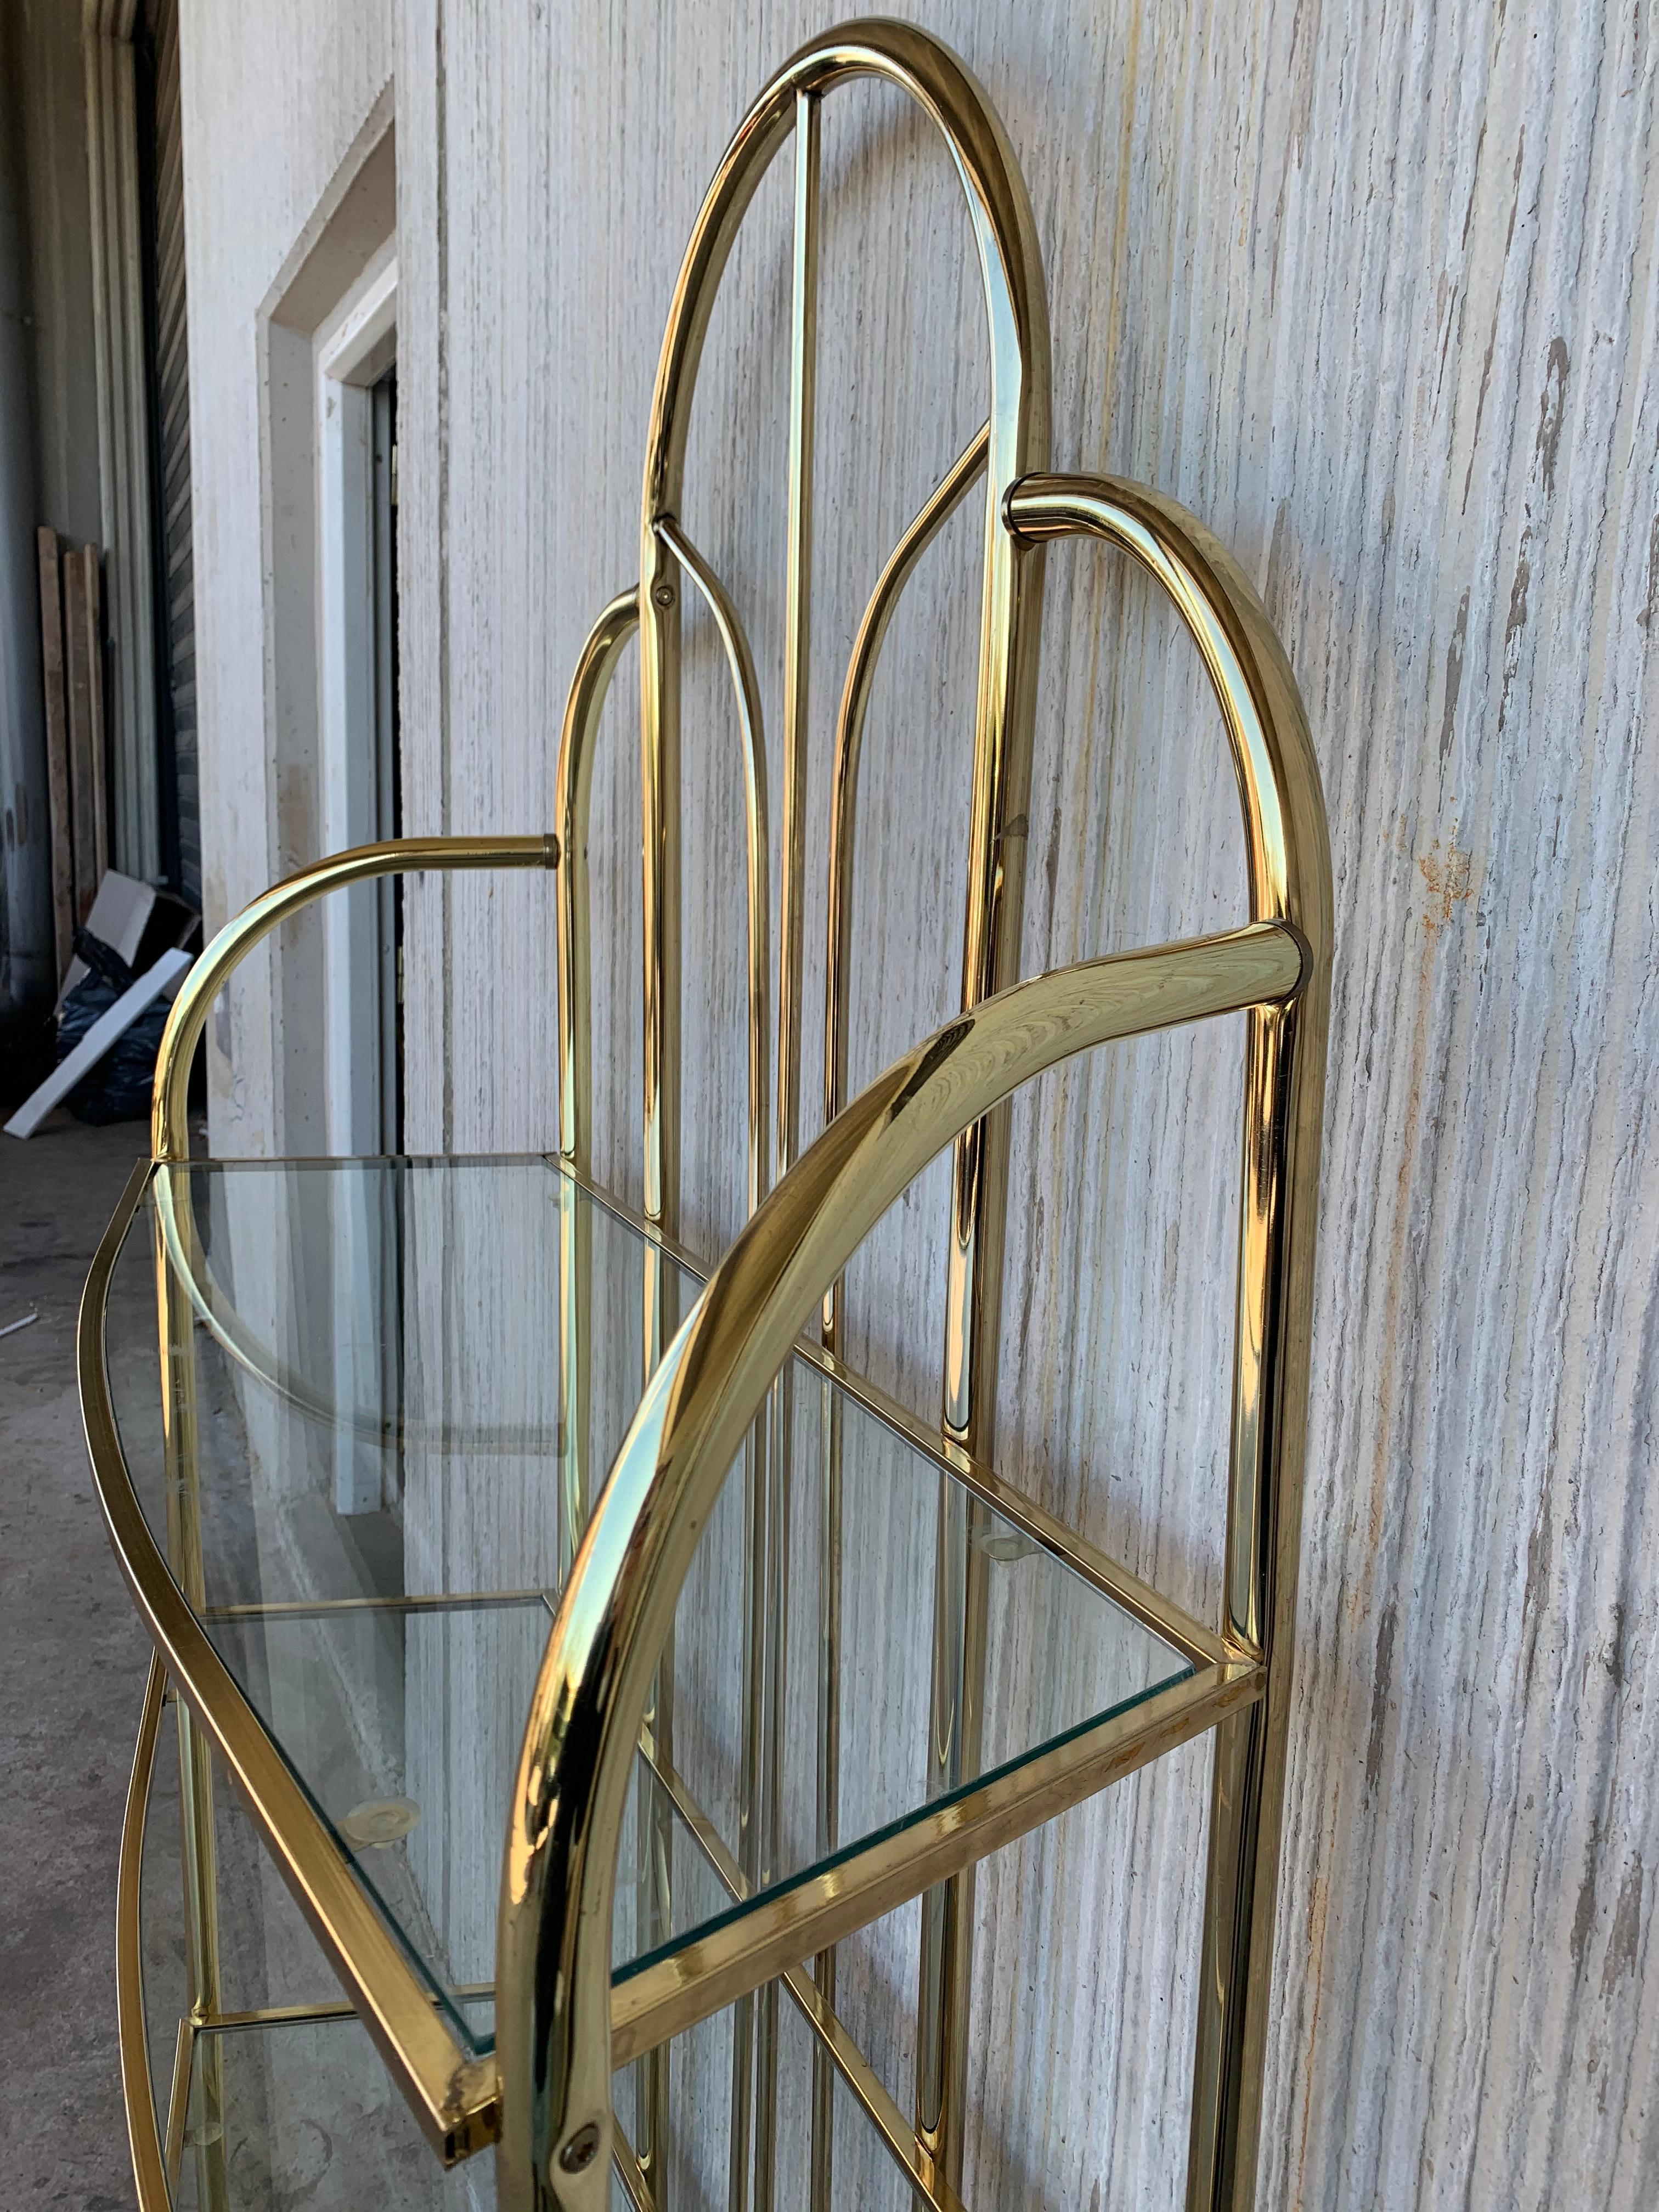 20th Century Vintage Brass Étagère Arched Glass Display Shelf with Four Shelves